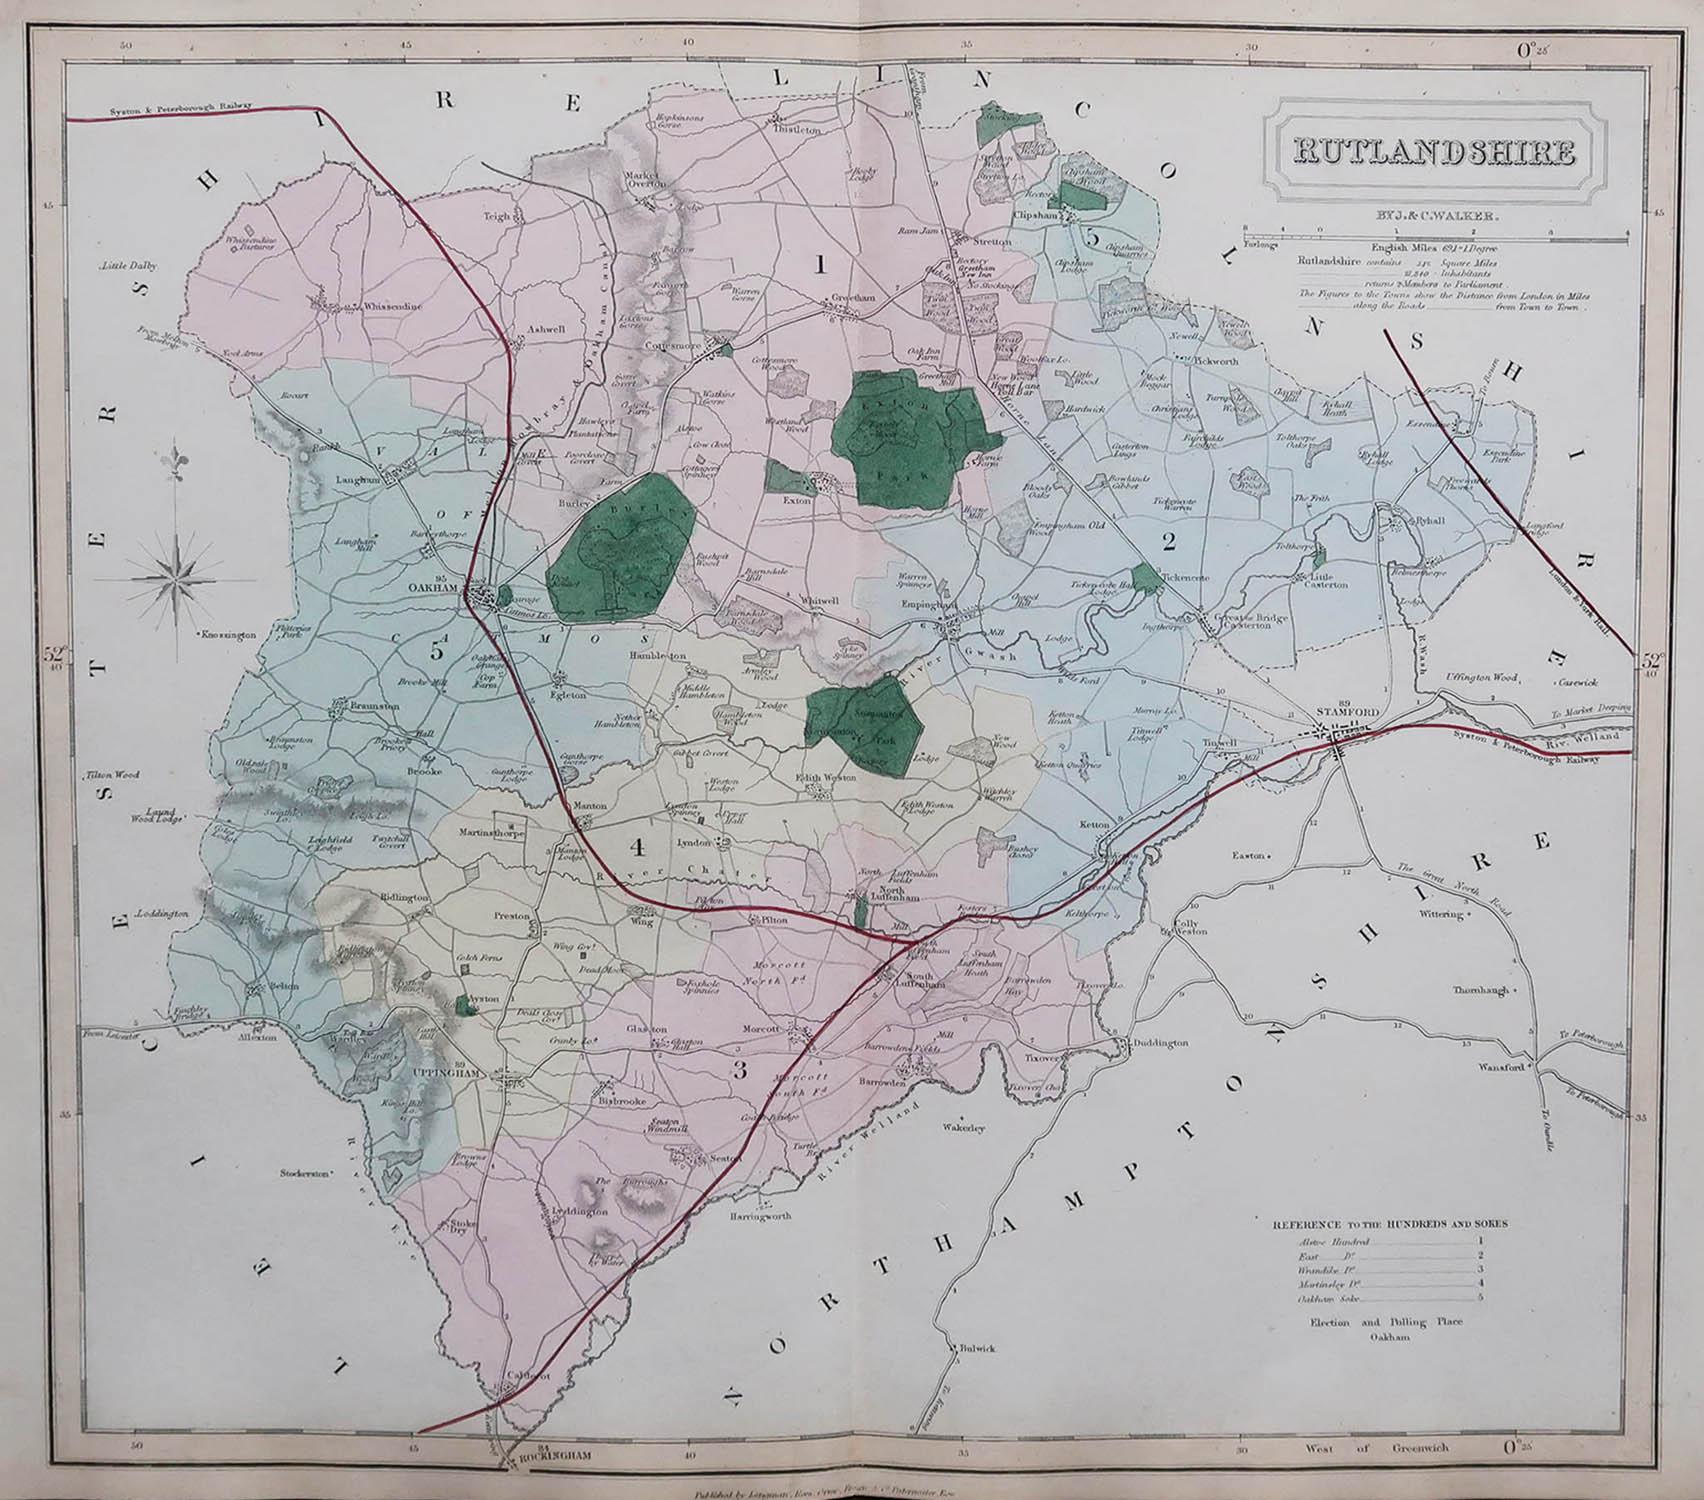 Great map of Rutland

Original colour

By J & C Walker

Published by Longman, Rees, Orme, Brown & Co. 1851

Unframed.




